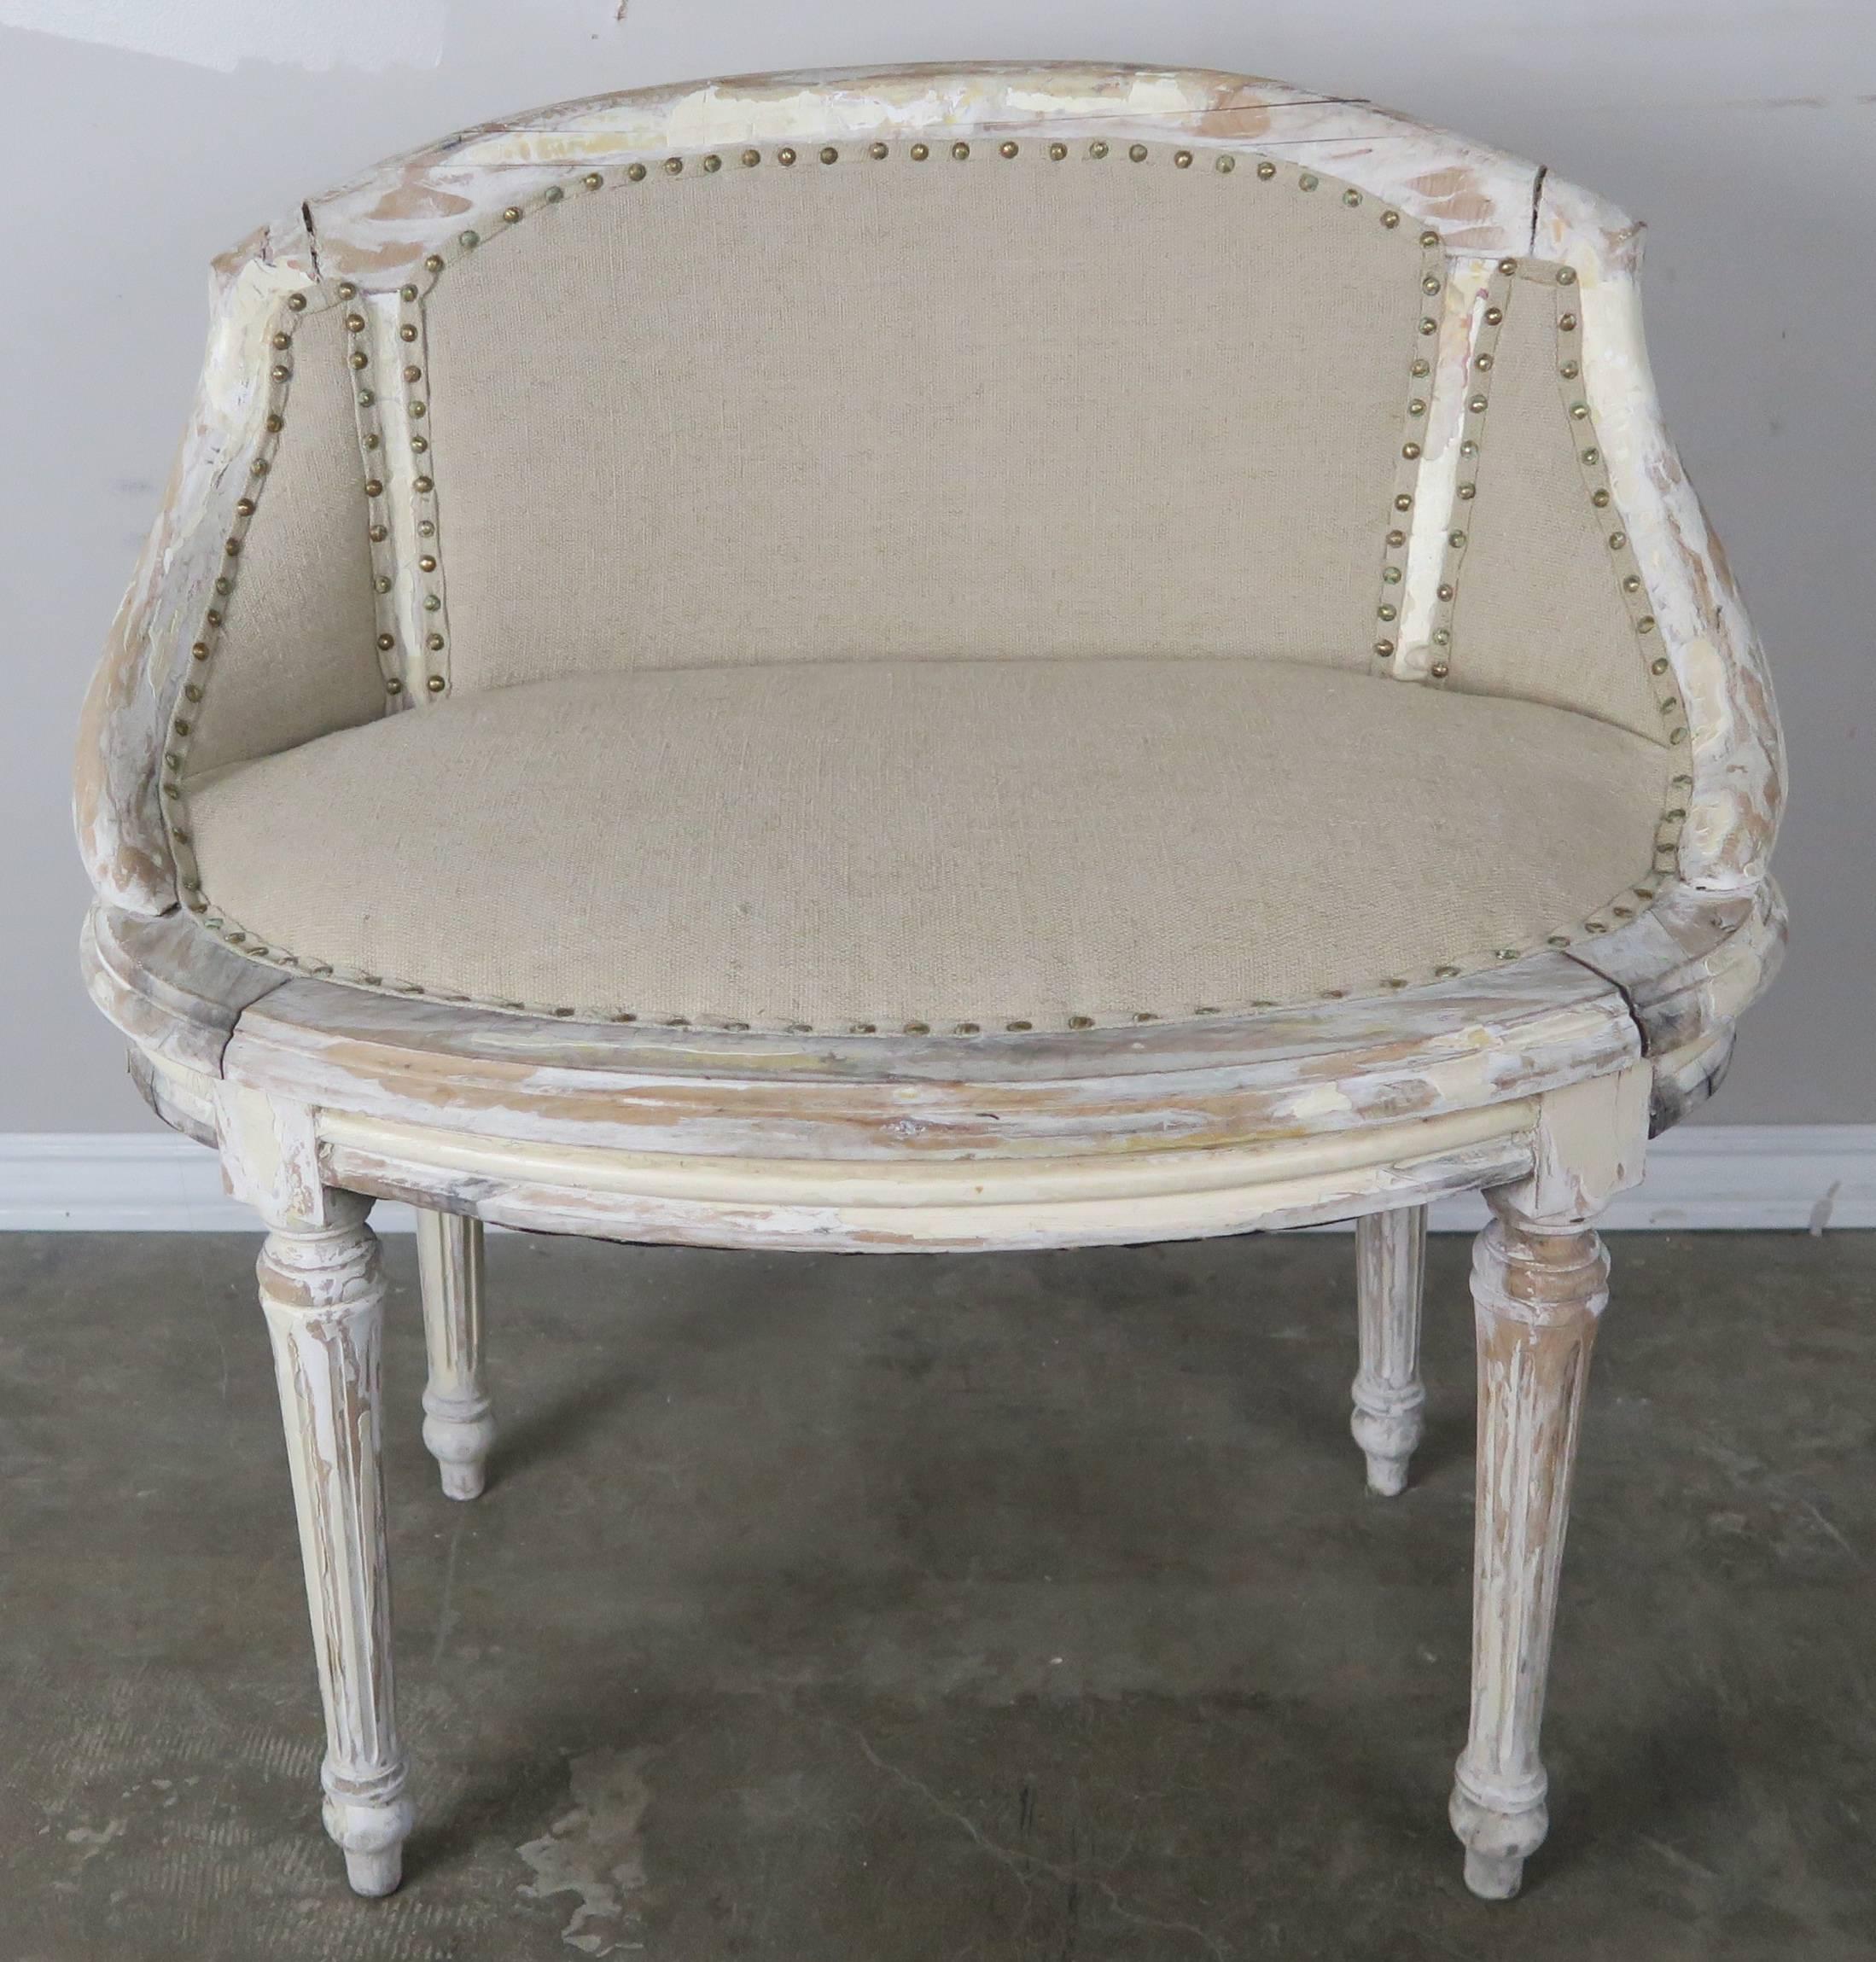 French painted neoclassical style bench newly upholstered in linen with nailhead trim detail.
Measures: Seat height 17